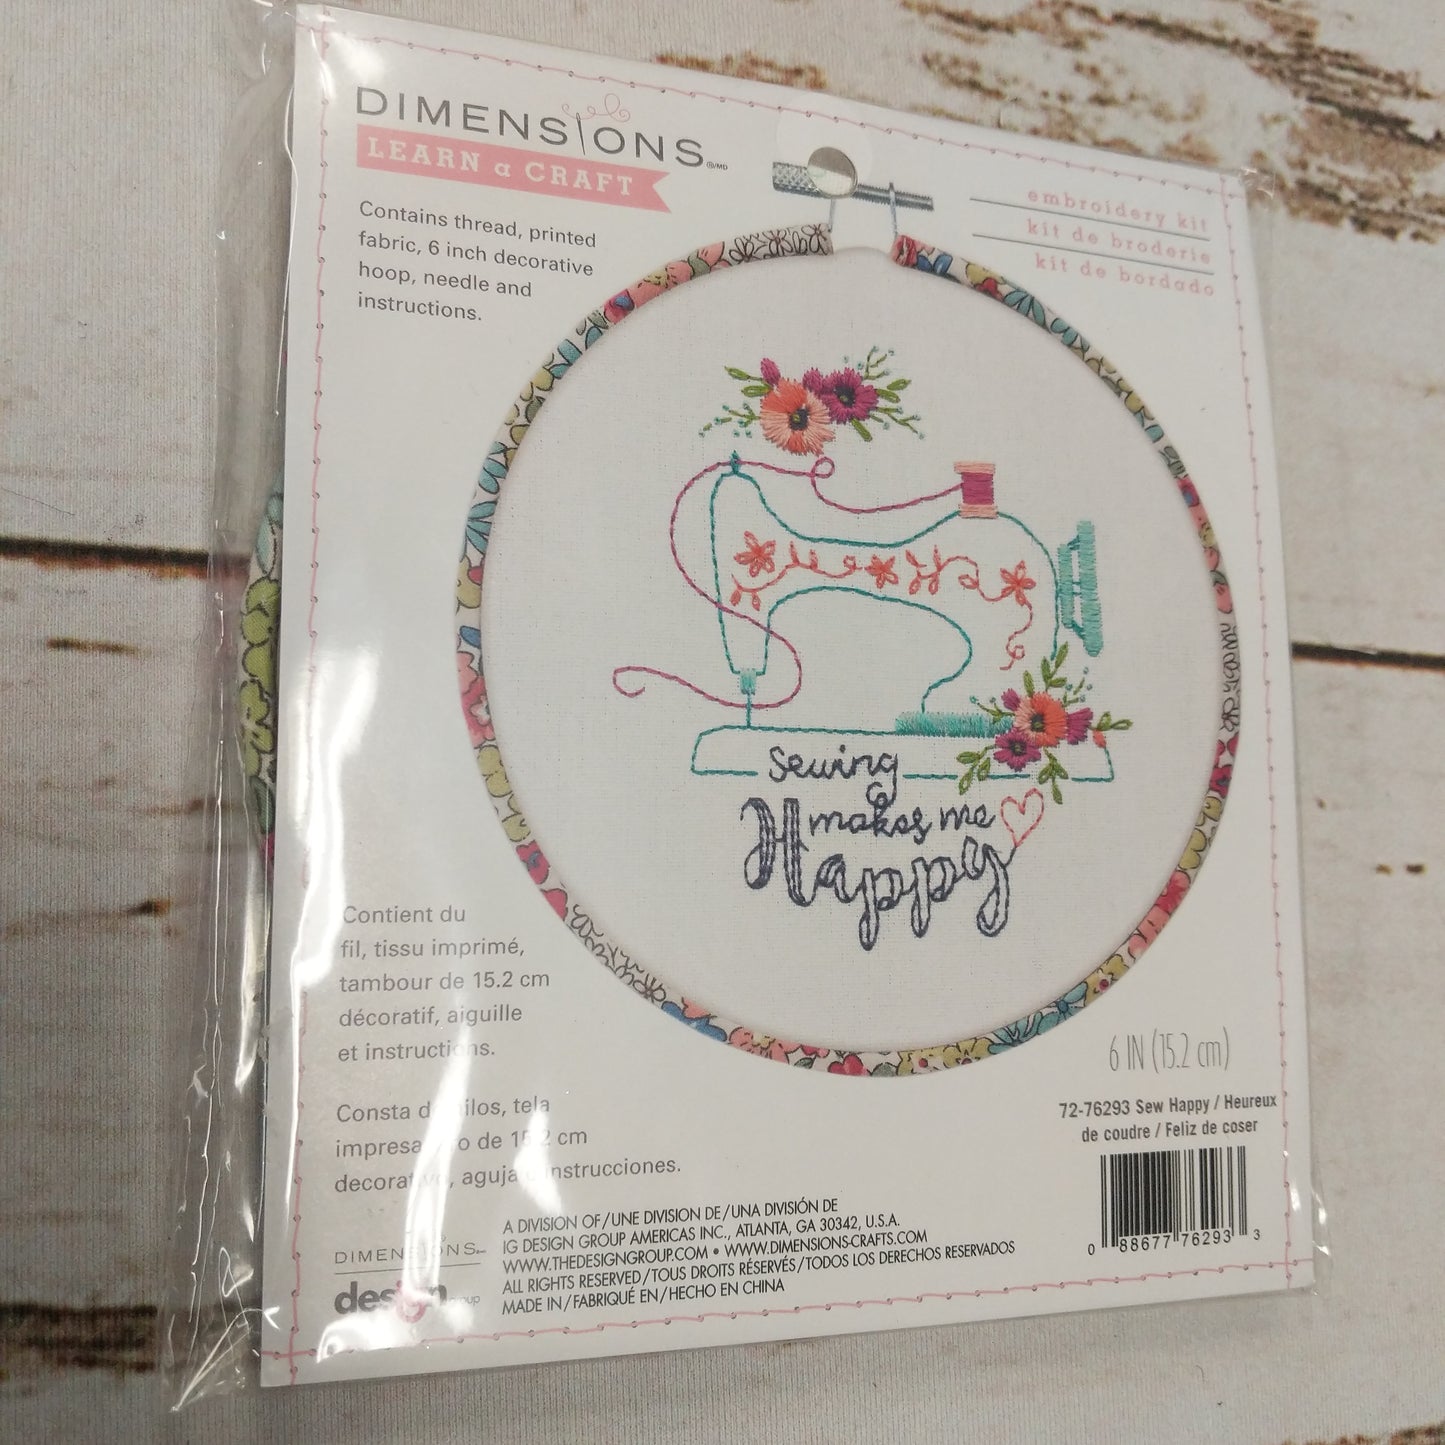 Embroidery Hoop Kit 15.2cm | Dimension Learn a Craft